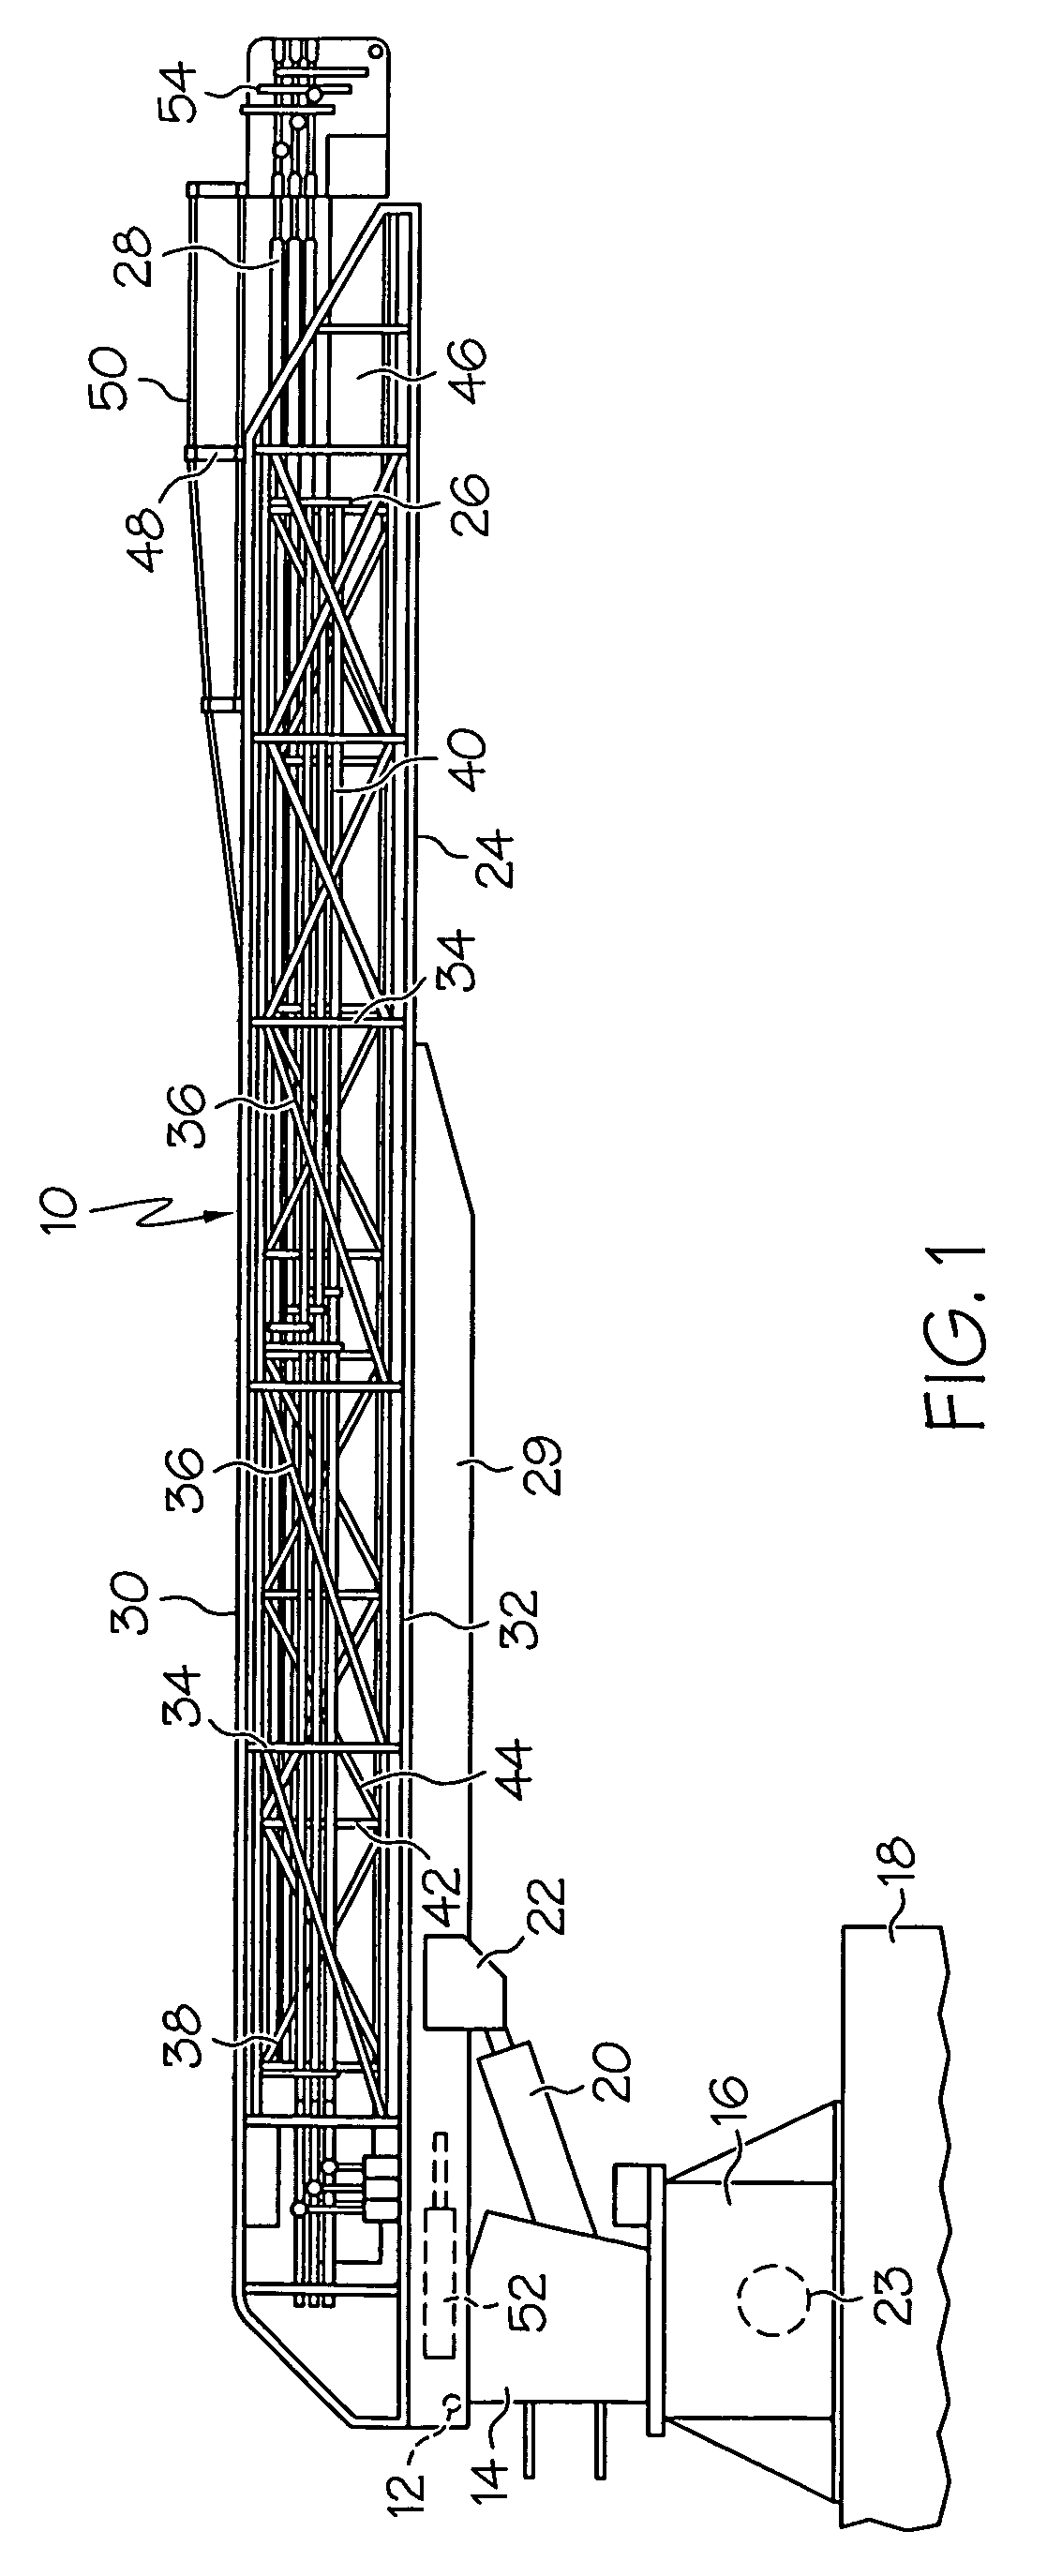 Laser-guided positioning device